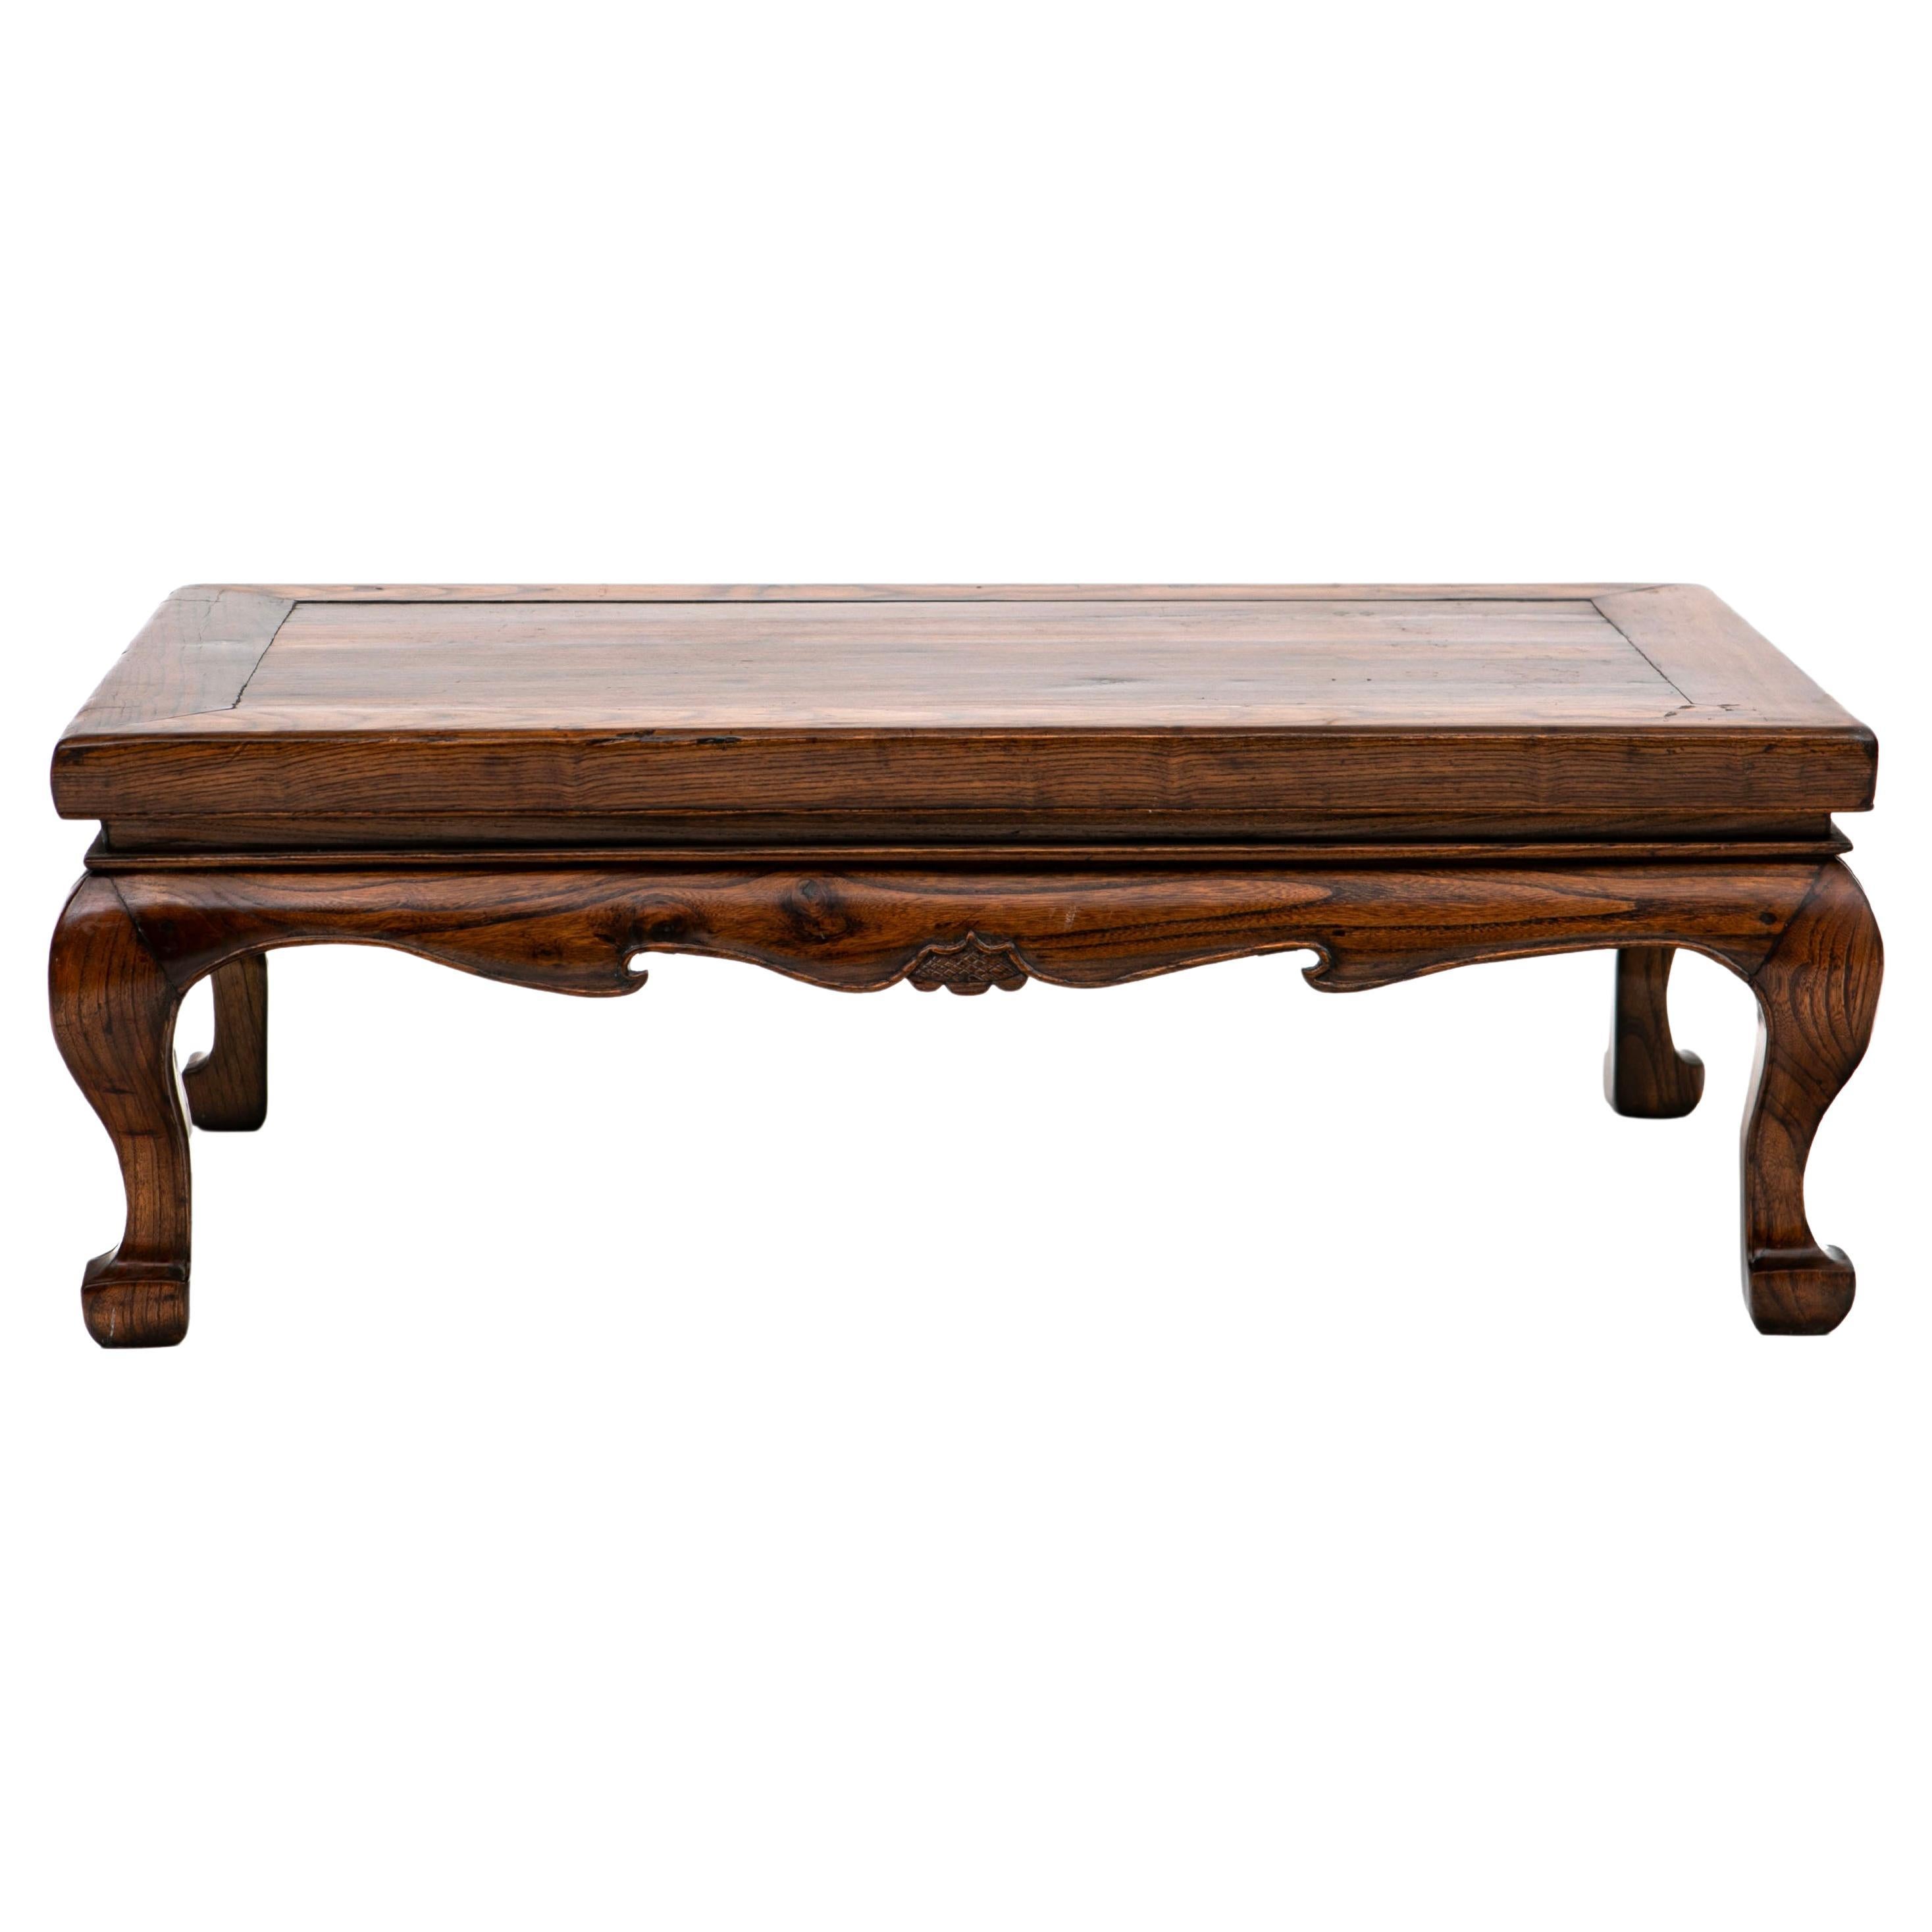 Chinese Mid 19th Century Qing Dynasty Kang / Low Table For Sale